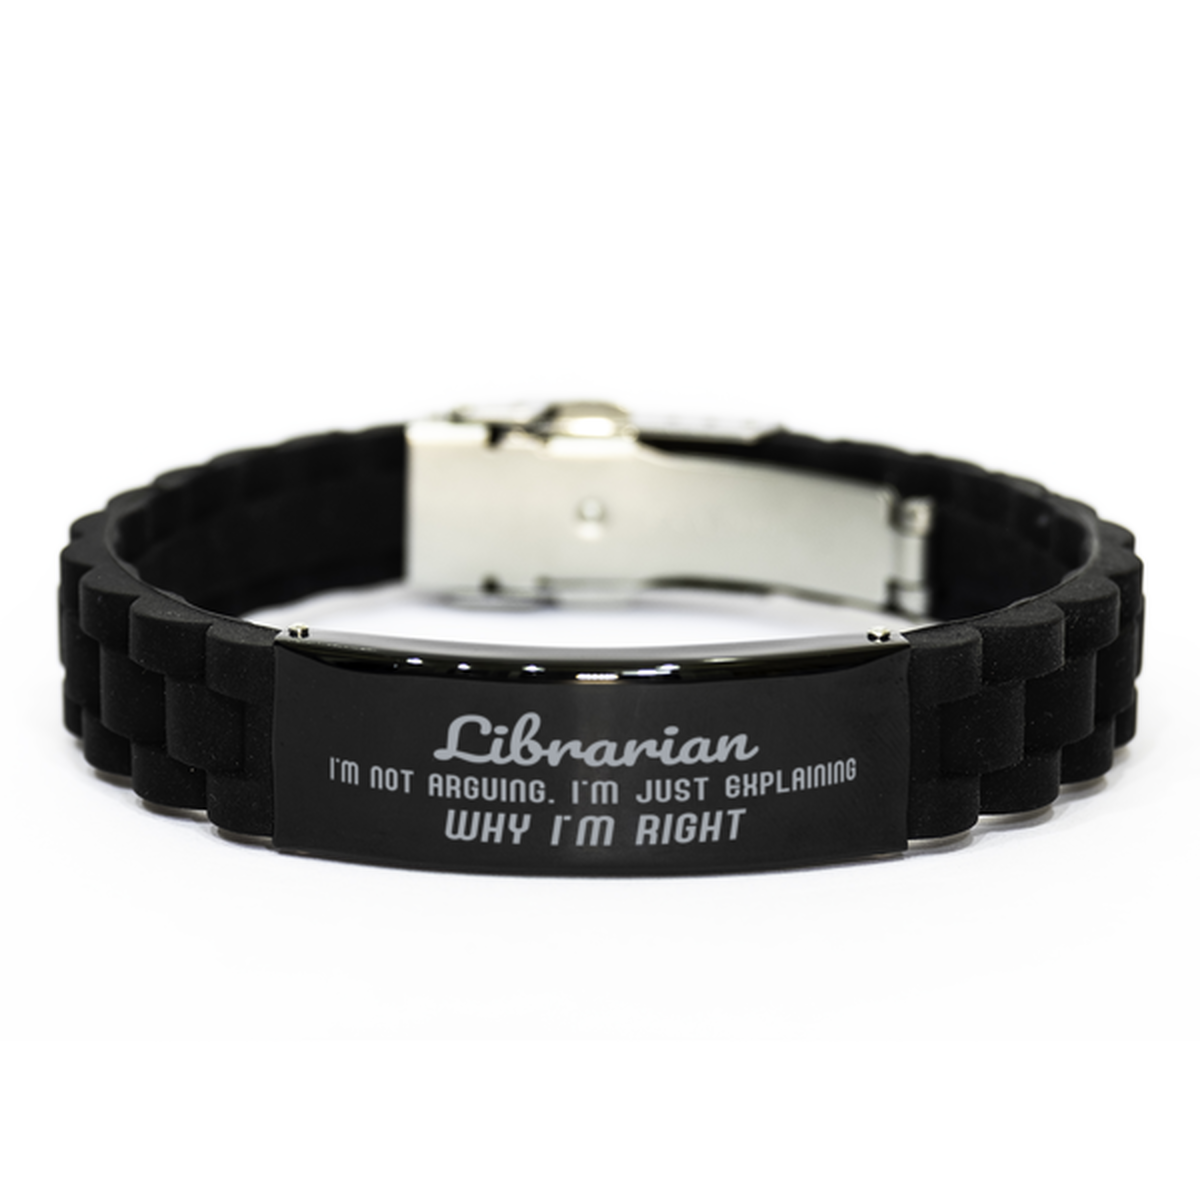 Librarian I'm not Arguing. I'm Just Explaining Why I'm RIGHT Black Glidelock Clasp Bracelet, Funny Saying Quote Librarian Gifts For Librarian Graduation Birthday Christmas Gifts for Men Women Coworker